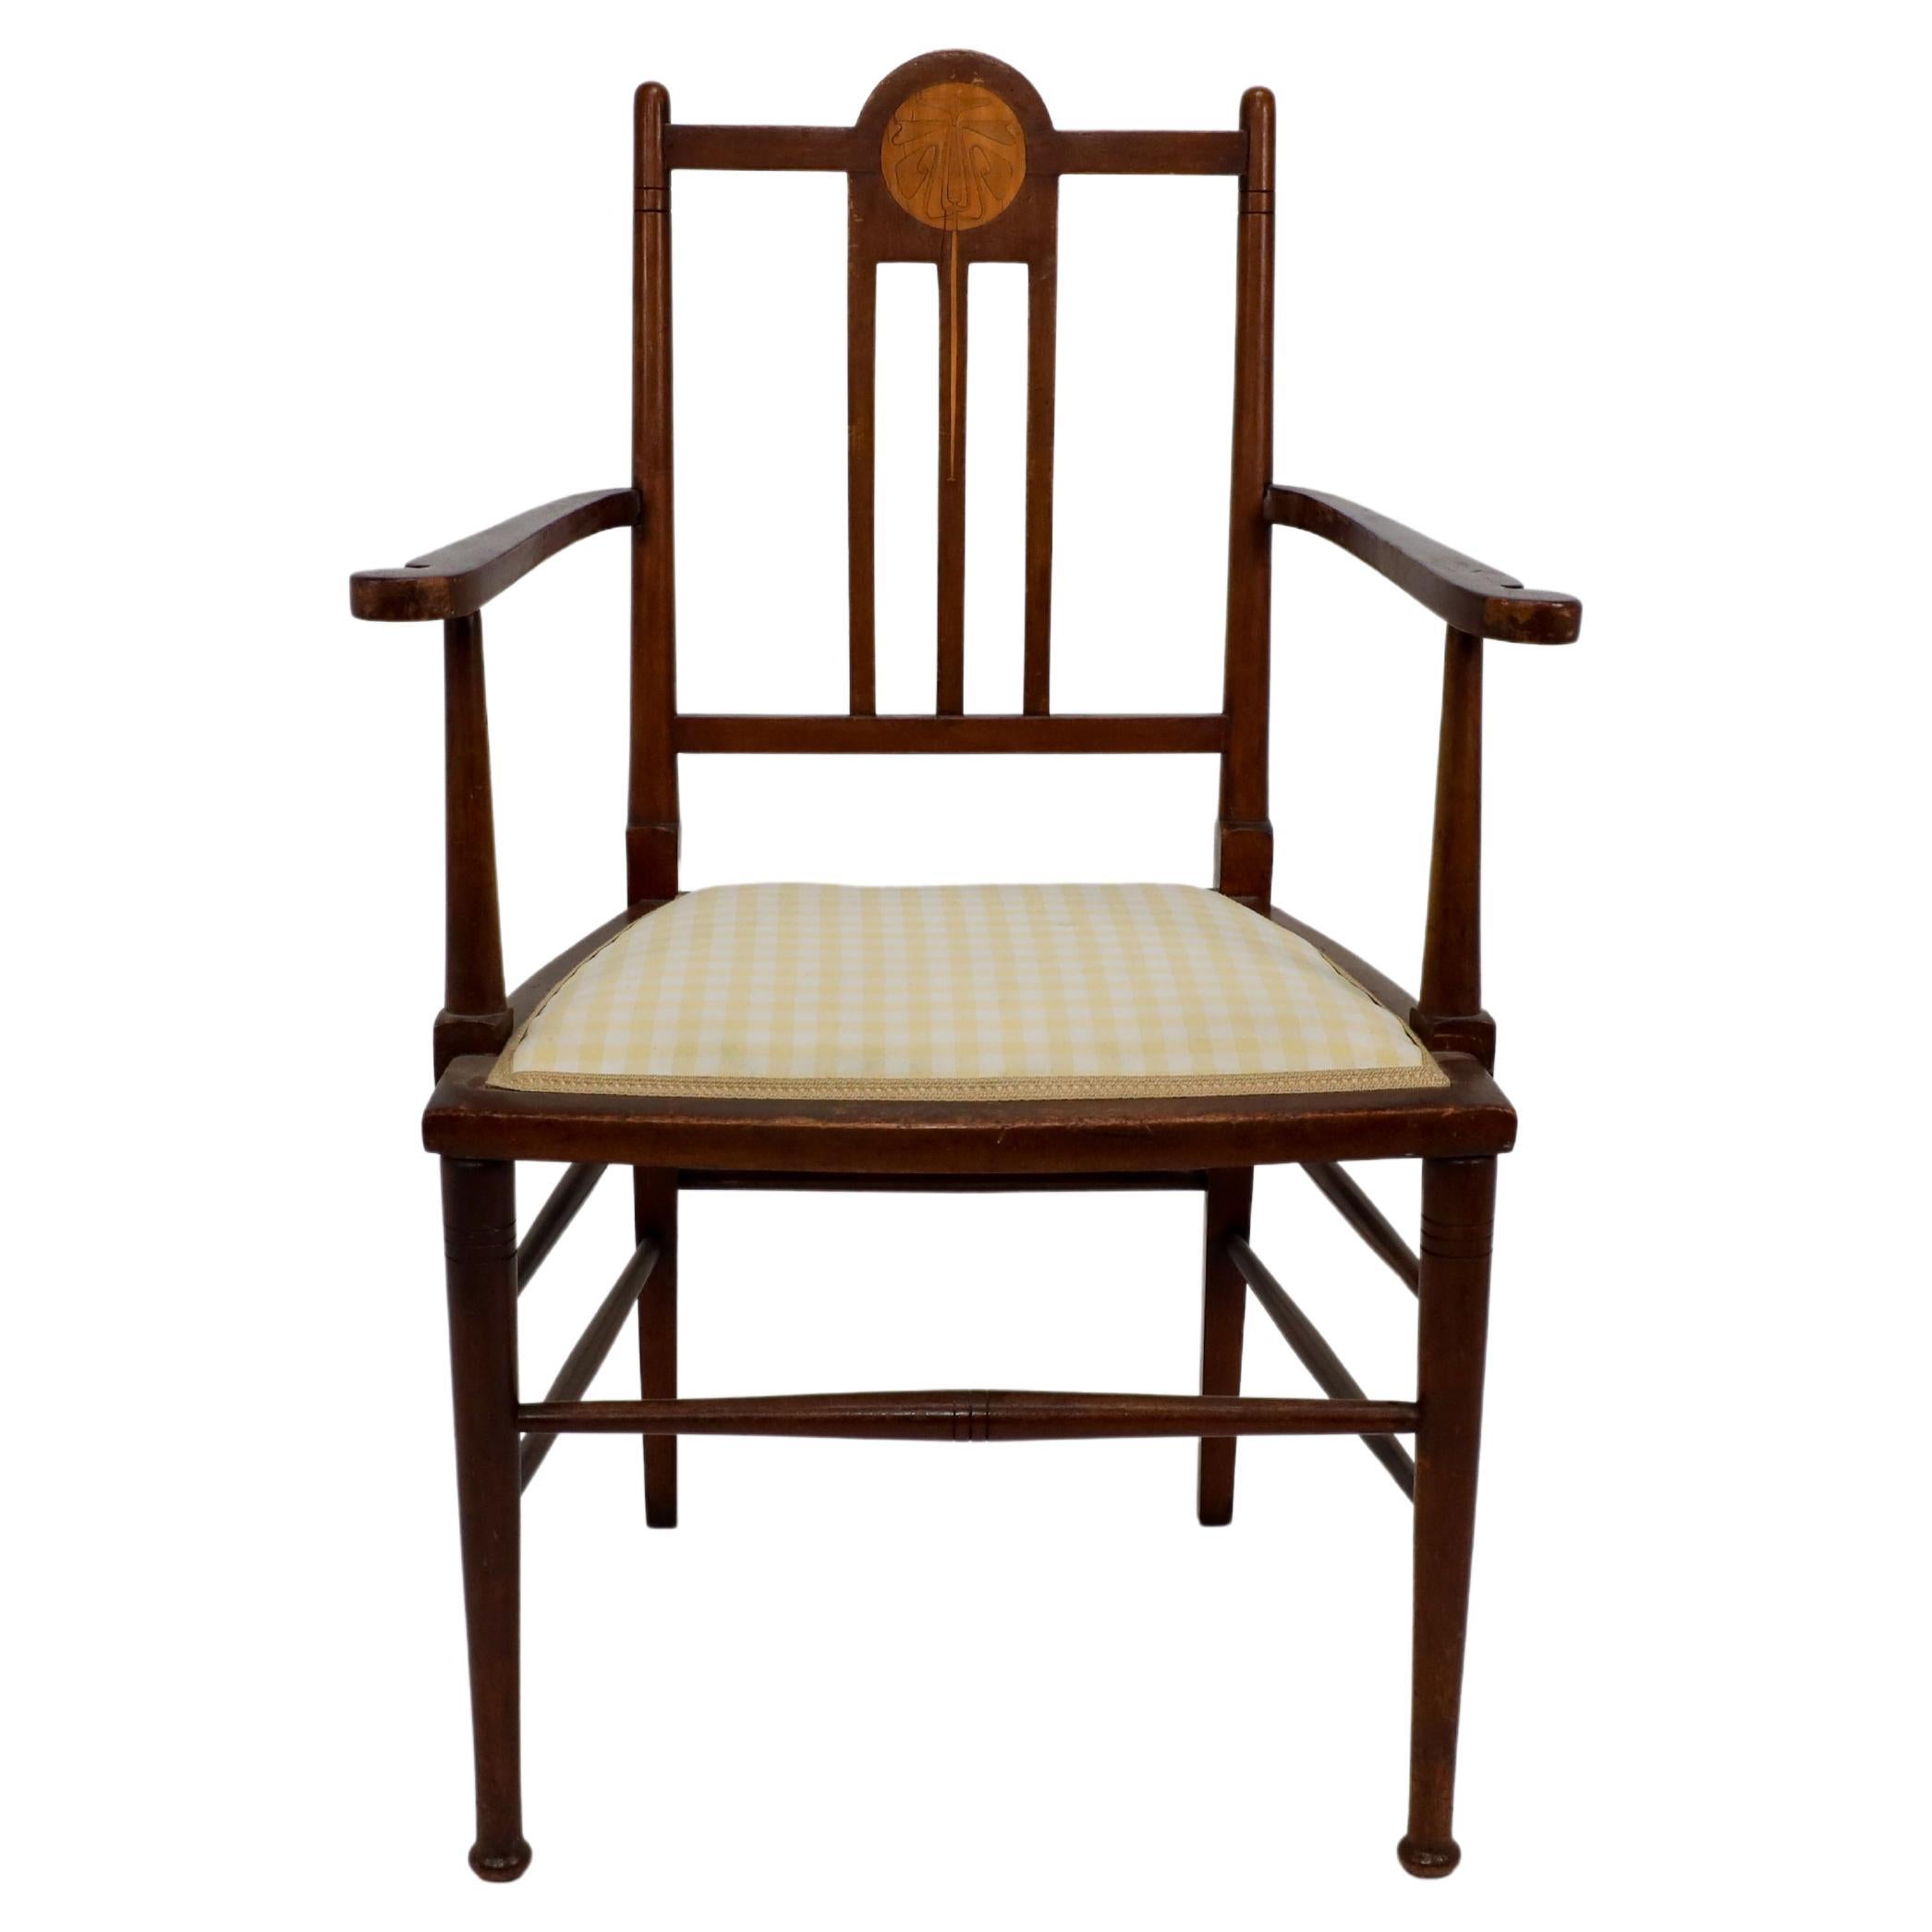 Liberty and Co in the style of G M Ellwood. An Arts and Crafts Walnut armchair with stylized floral inlay to the